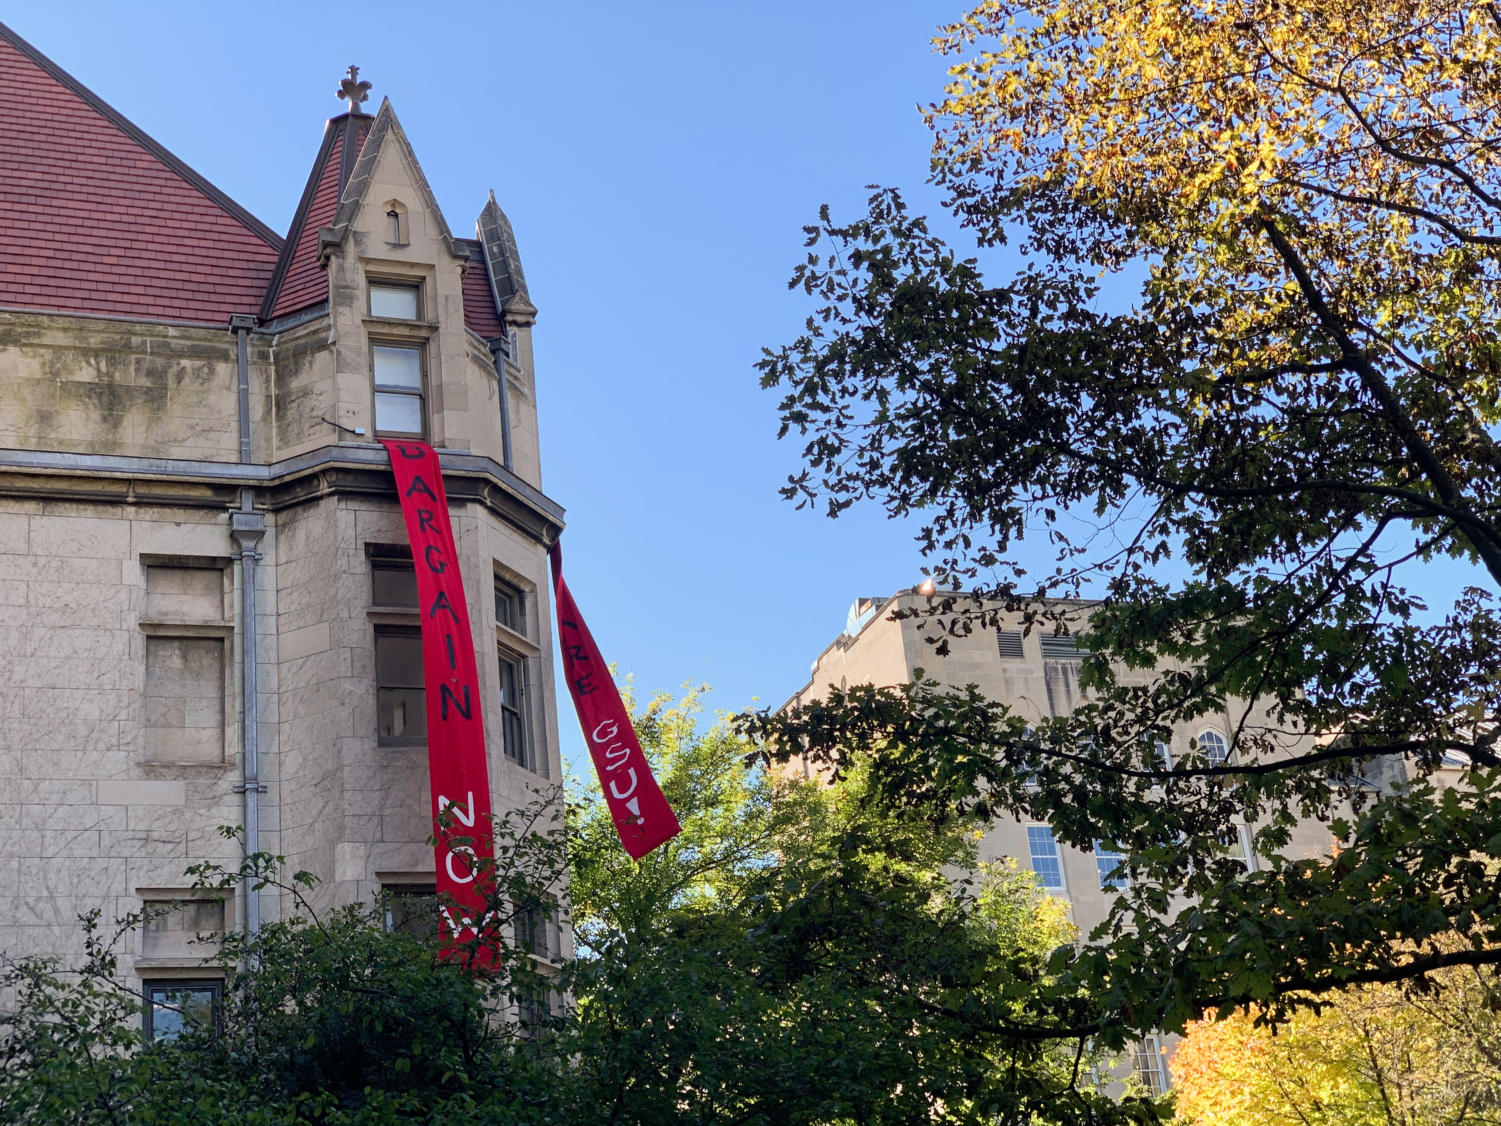 Students affiliated with Graduate Students United unfurled a banner on Cobb Hall calling for UChicago to bargain.